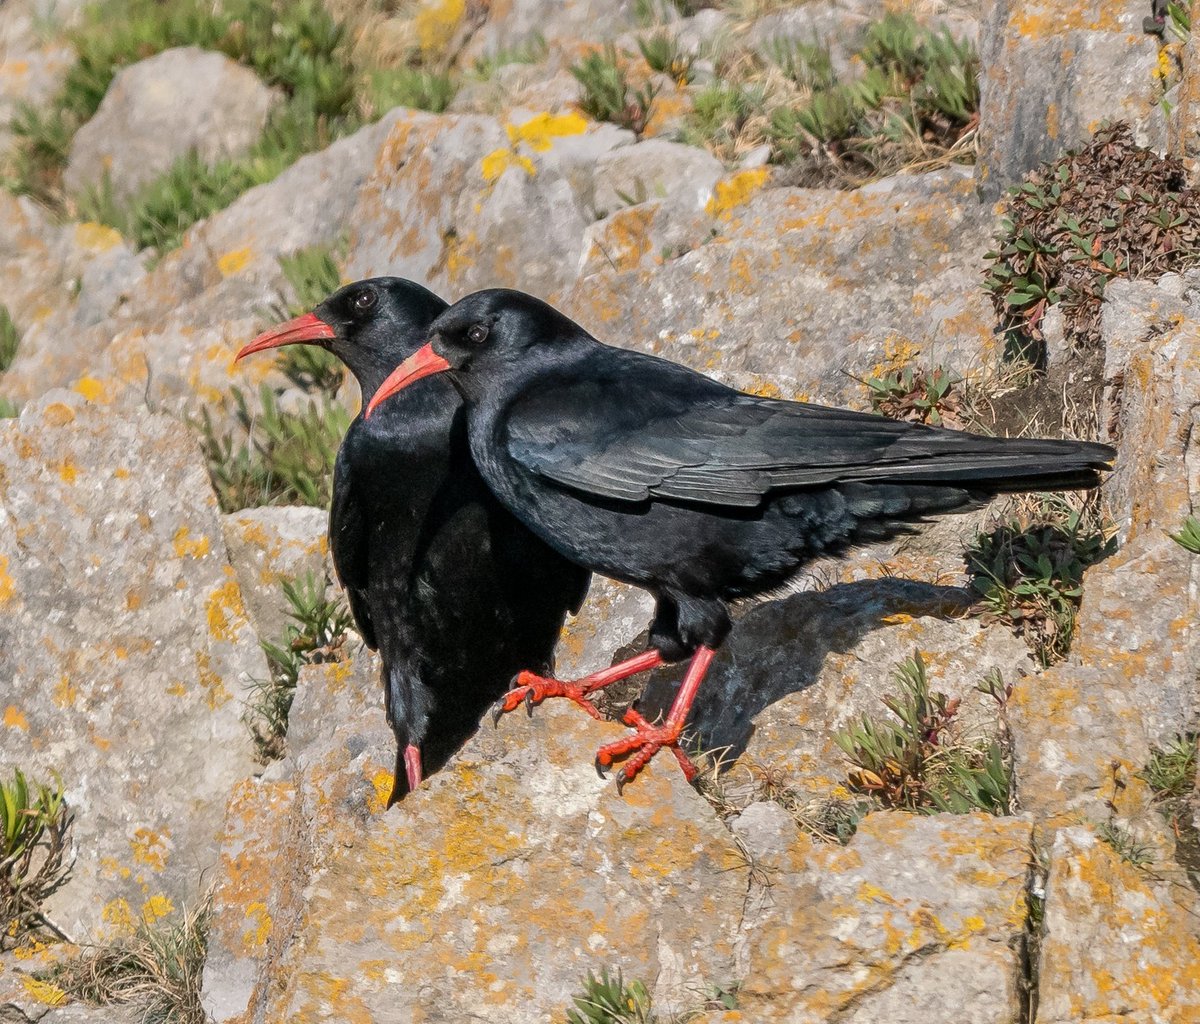 I was lucky enough to spend some time watching this pair of Choughs near Rhossili Bay in South Wales early on Sunday morning #Chough